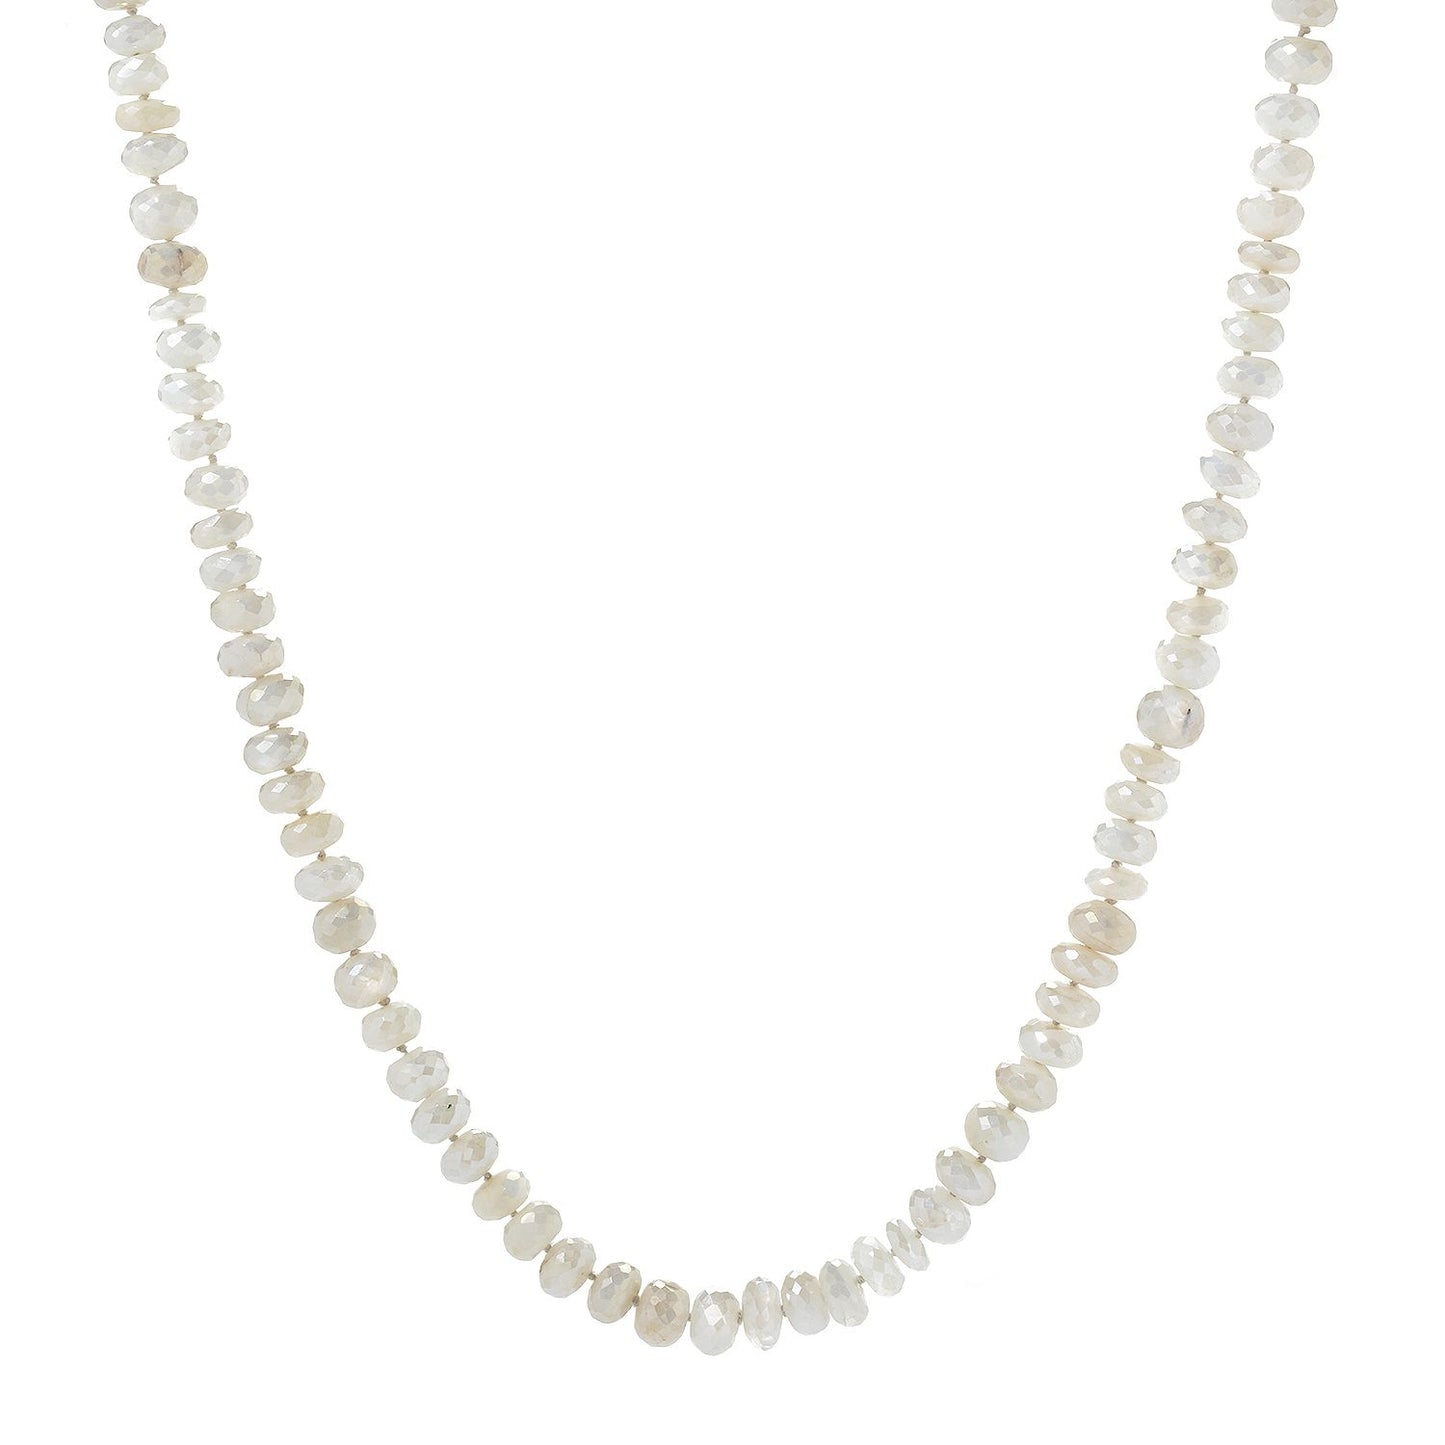 Pinctore 35" White Moonstone Endless Beaded Necklace - pinctore